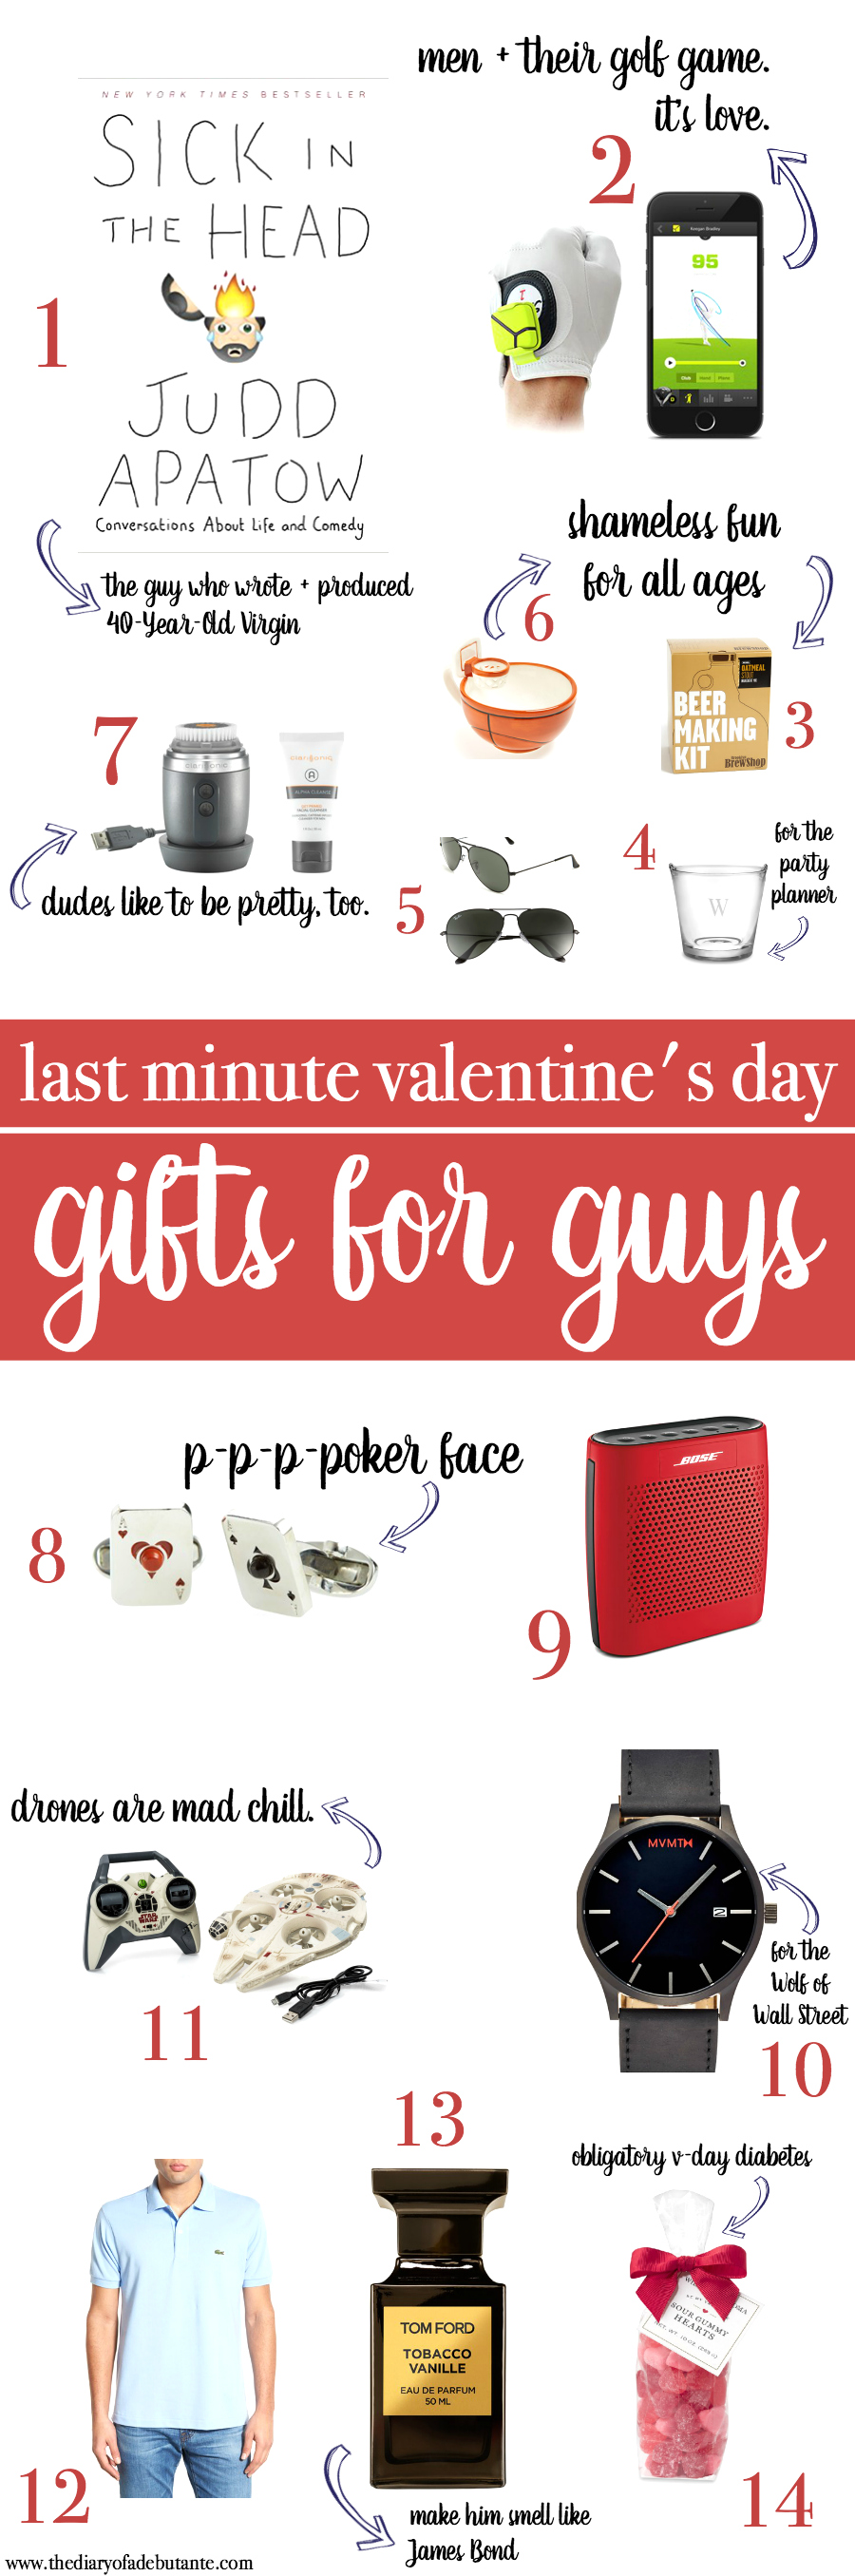 Valentine's Day Gift Guide, Gift Ideas for Guys, Gifts for Guys, Valentine's Day Gifts, Gifts for Him, Stephanie Ziajka, Diary of a Debutante